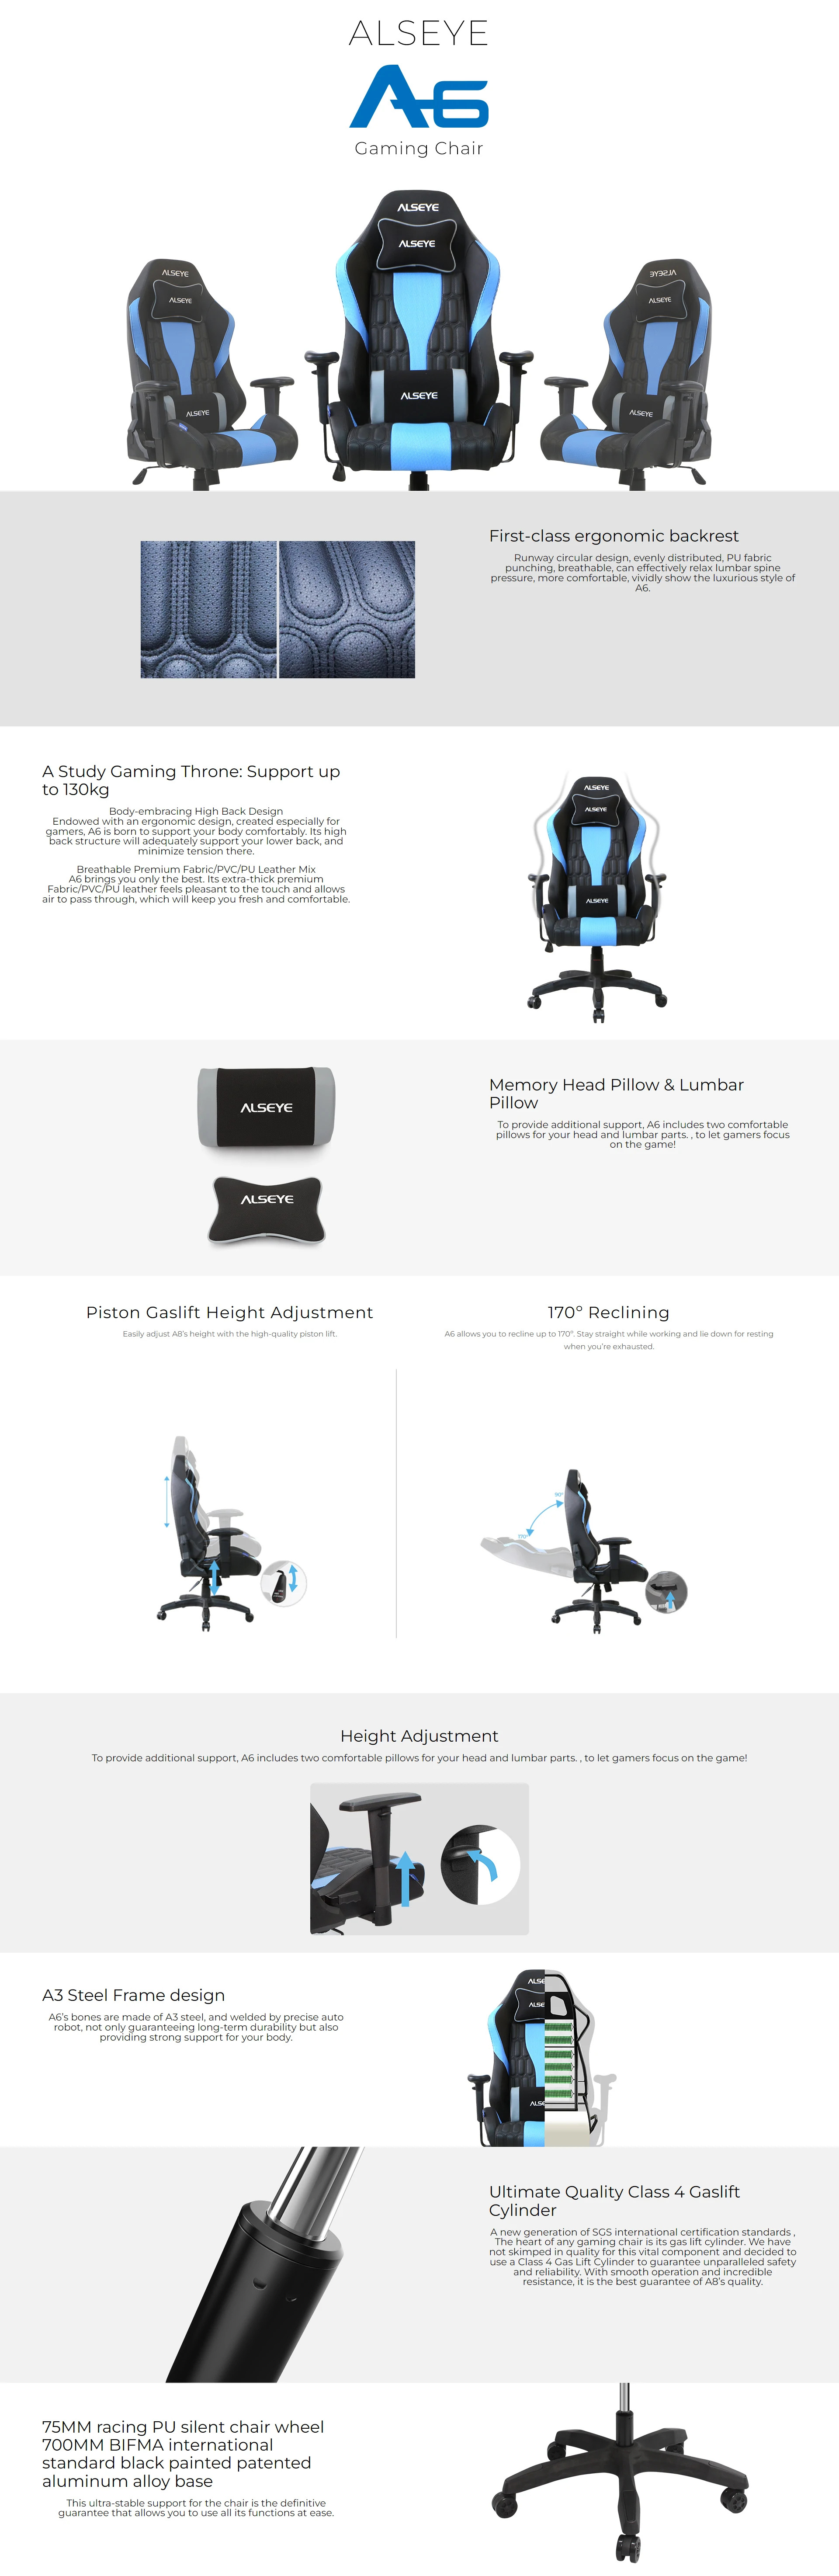 Overview - Alseye A6 Gaming Chair